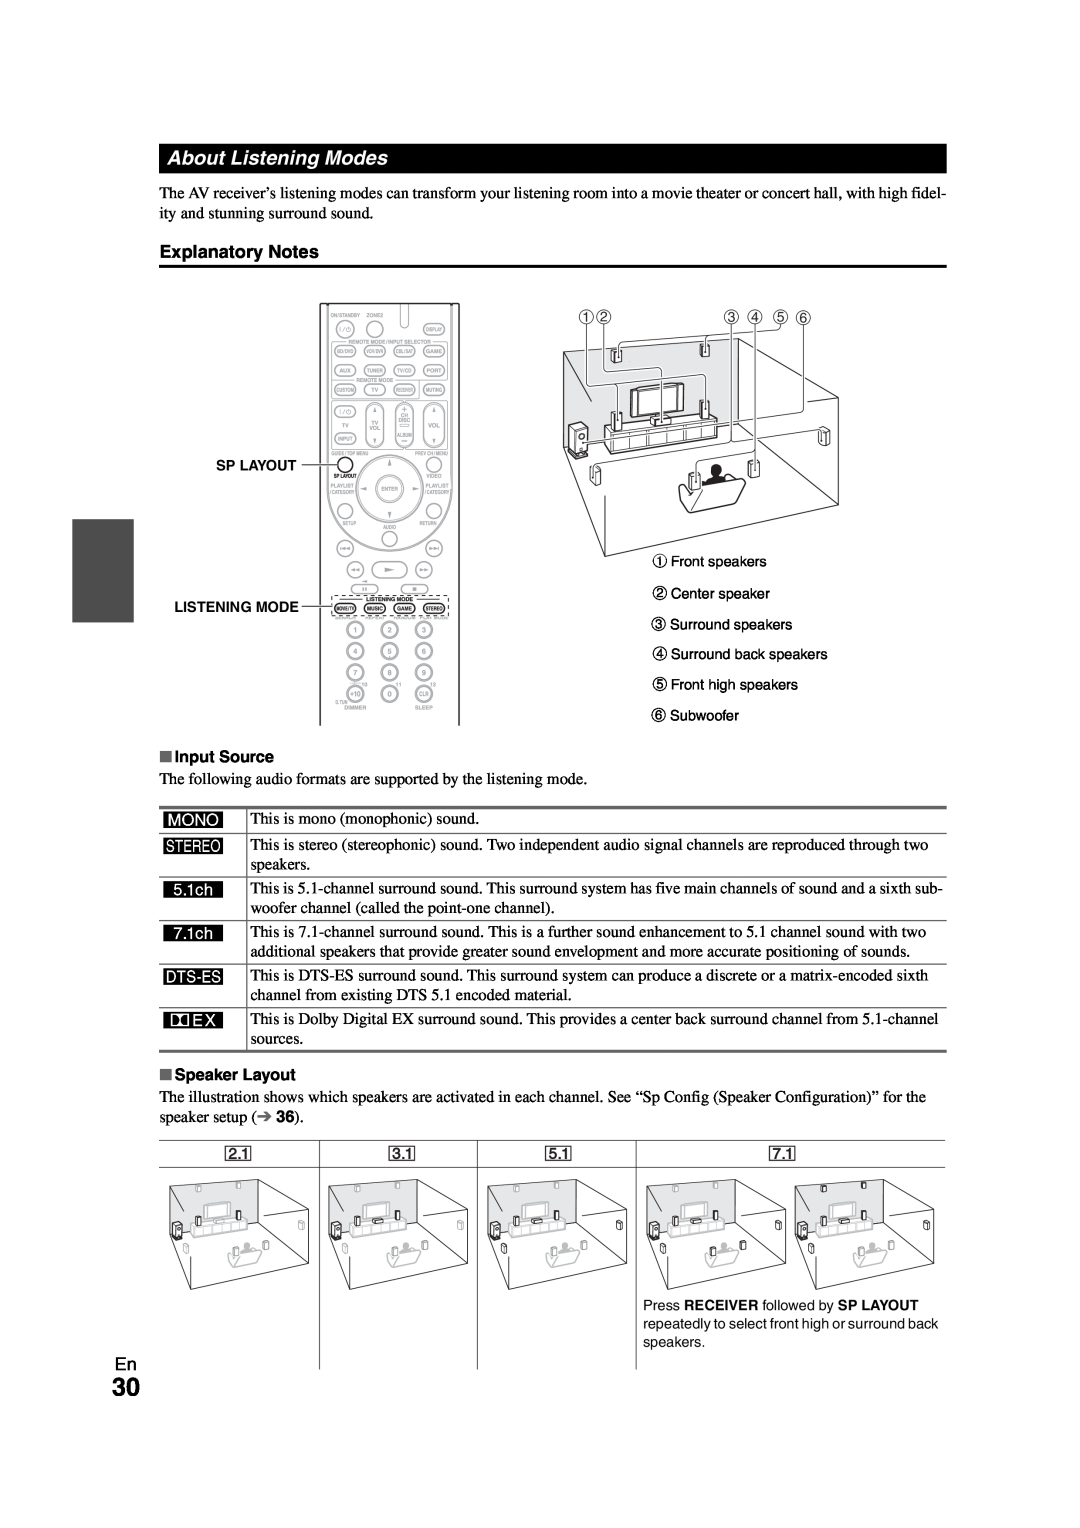 Onkyo TX-SR508 instruction manual About Listening Modes, Explanatory Notes, Input Source, Speaker Layout 